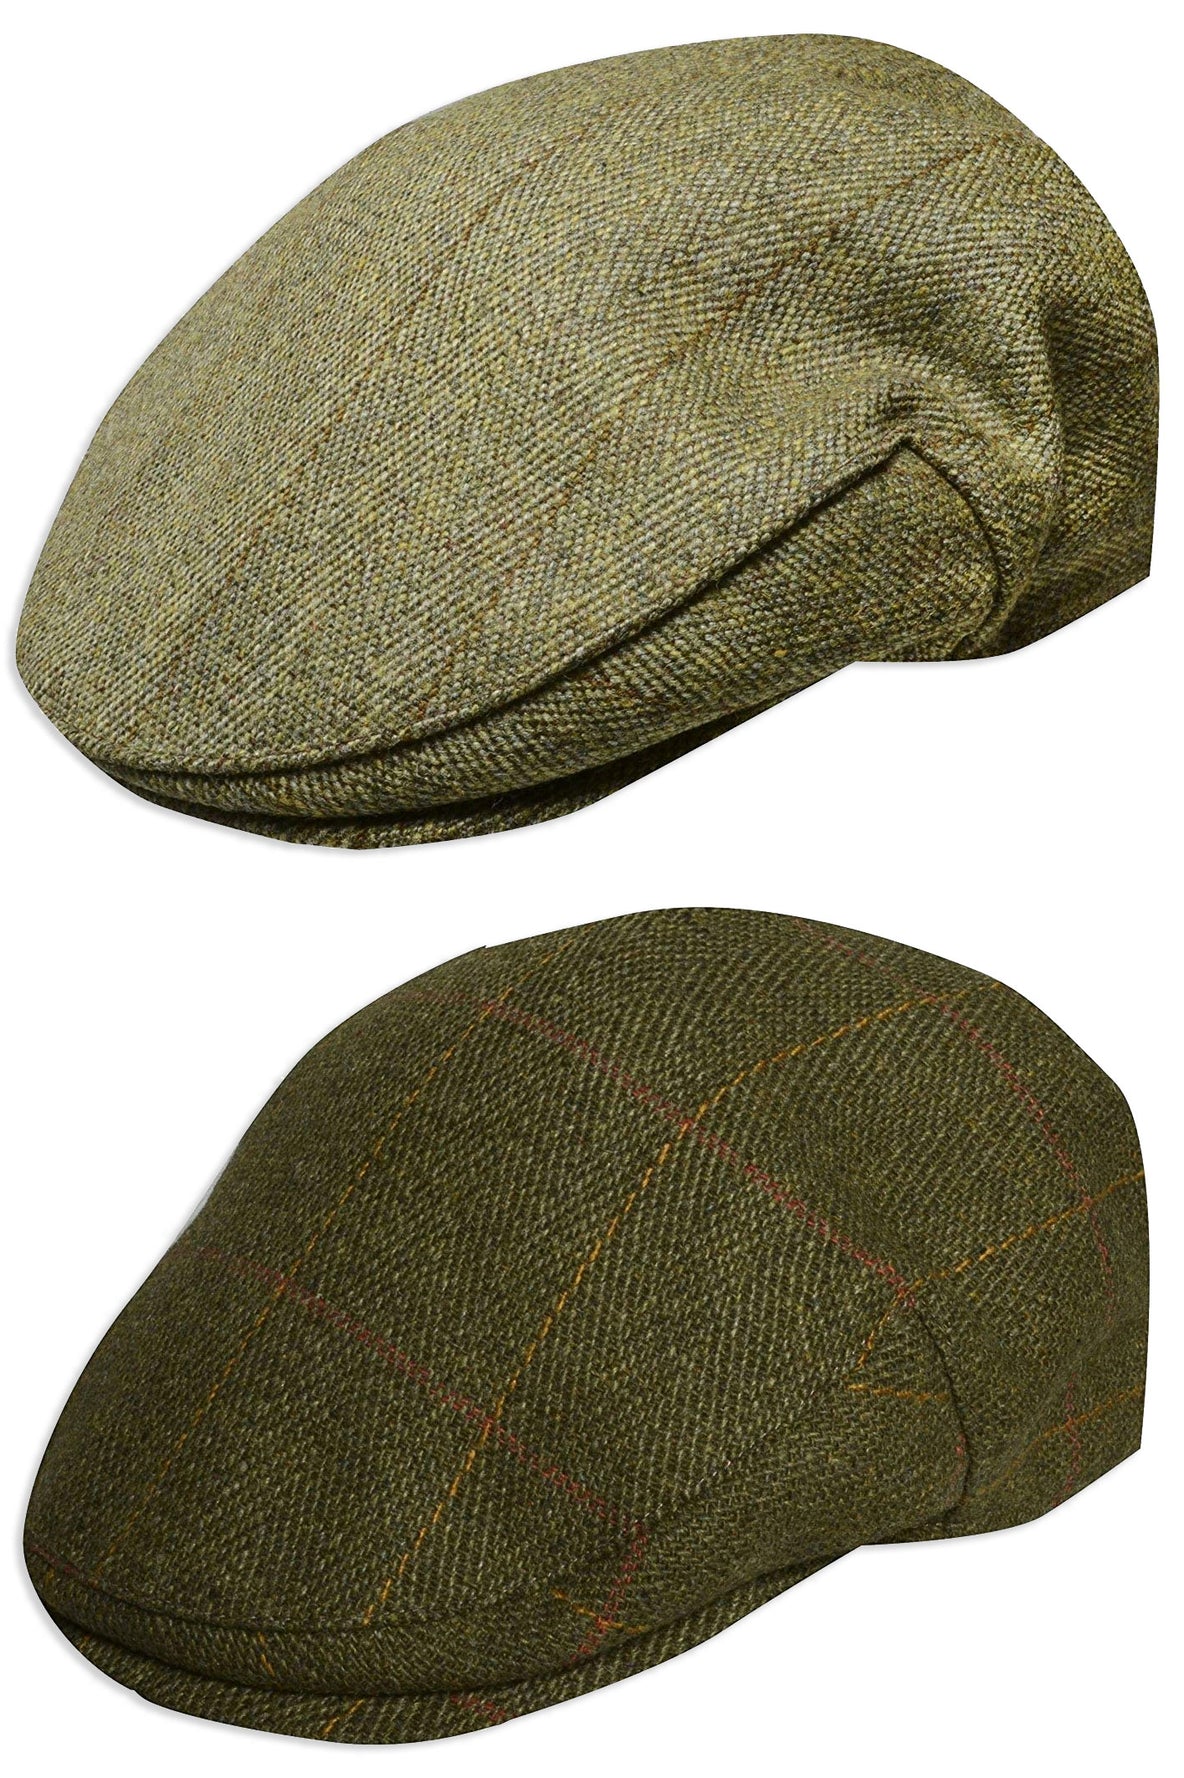 Strathanan Derby Tweed Flat Cap - a classic Country Cap 